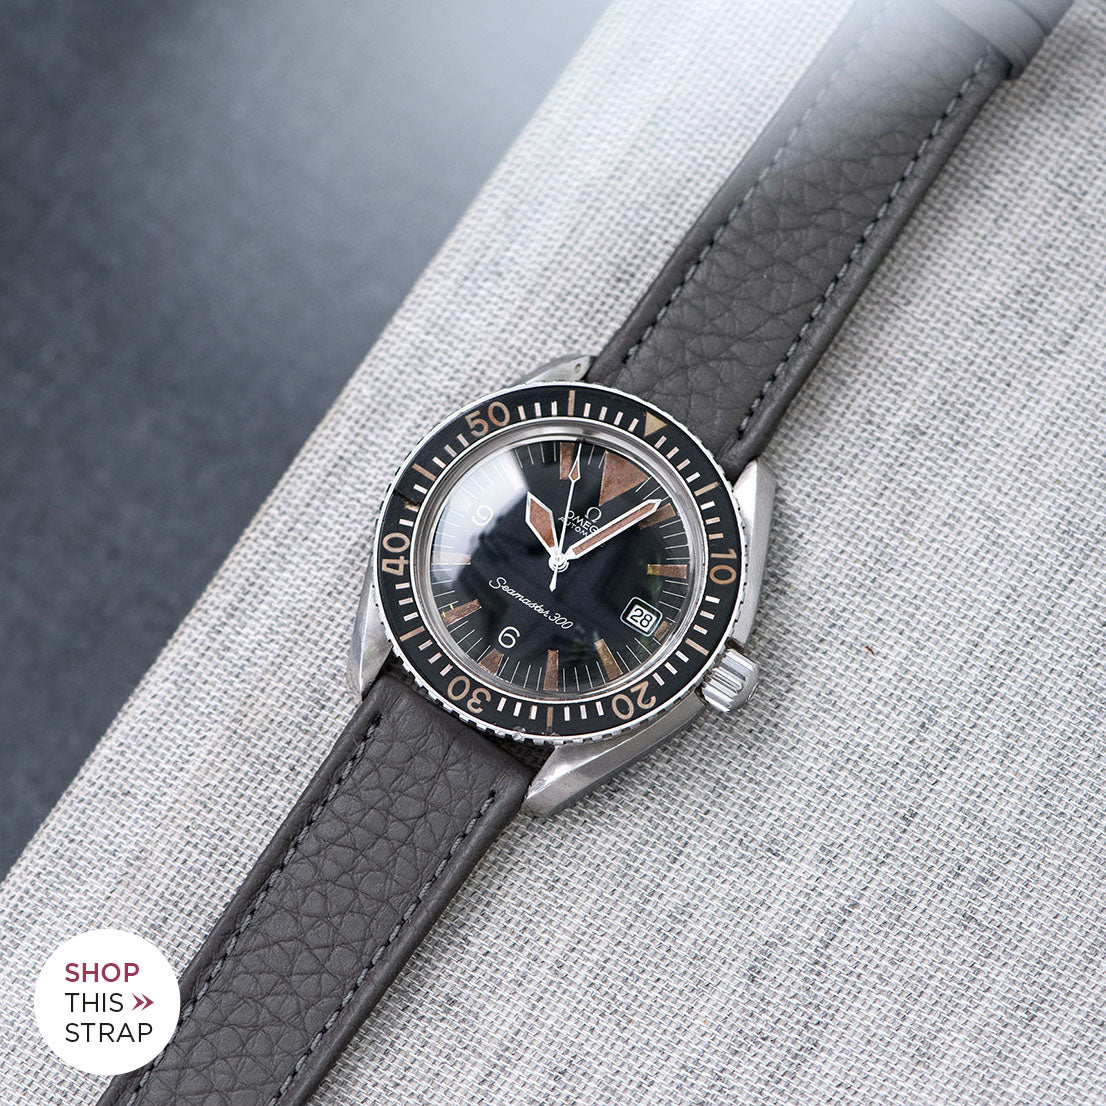 Bulang and Sons_Strap Guide_The omega SM 300 Seamaster_Taurillon Grey Heritage Leather Watch Strap